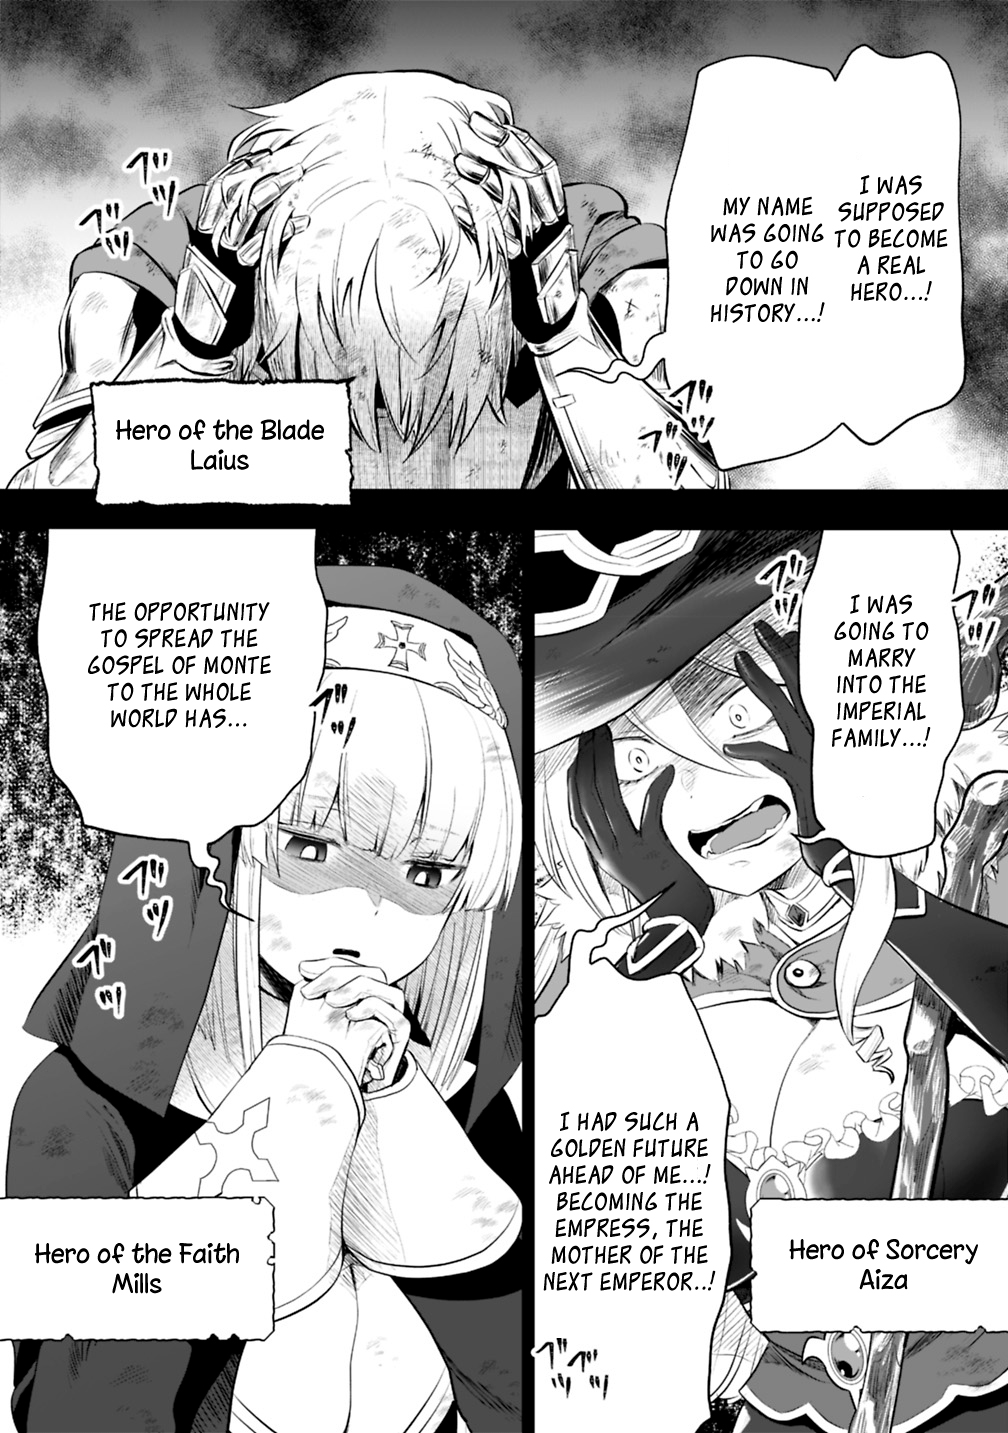 Did You Know That A Playboy Can Change His Job To A Sage? ~The Level 99 Jester Expelled From The Heroes' Party Will Become A 'great Sage'~ - Page 2